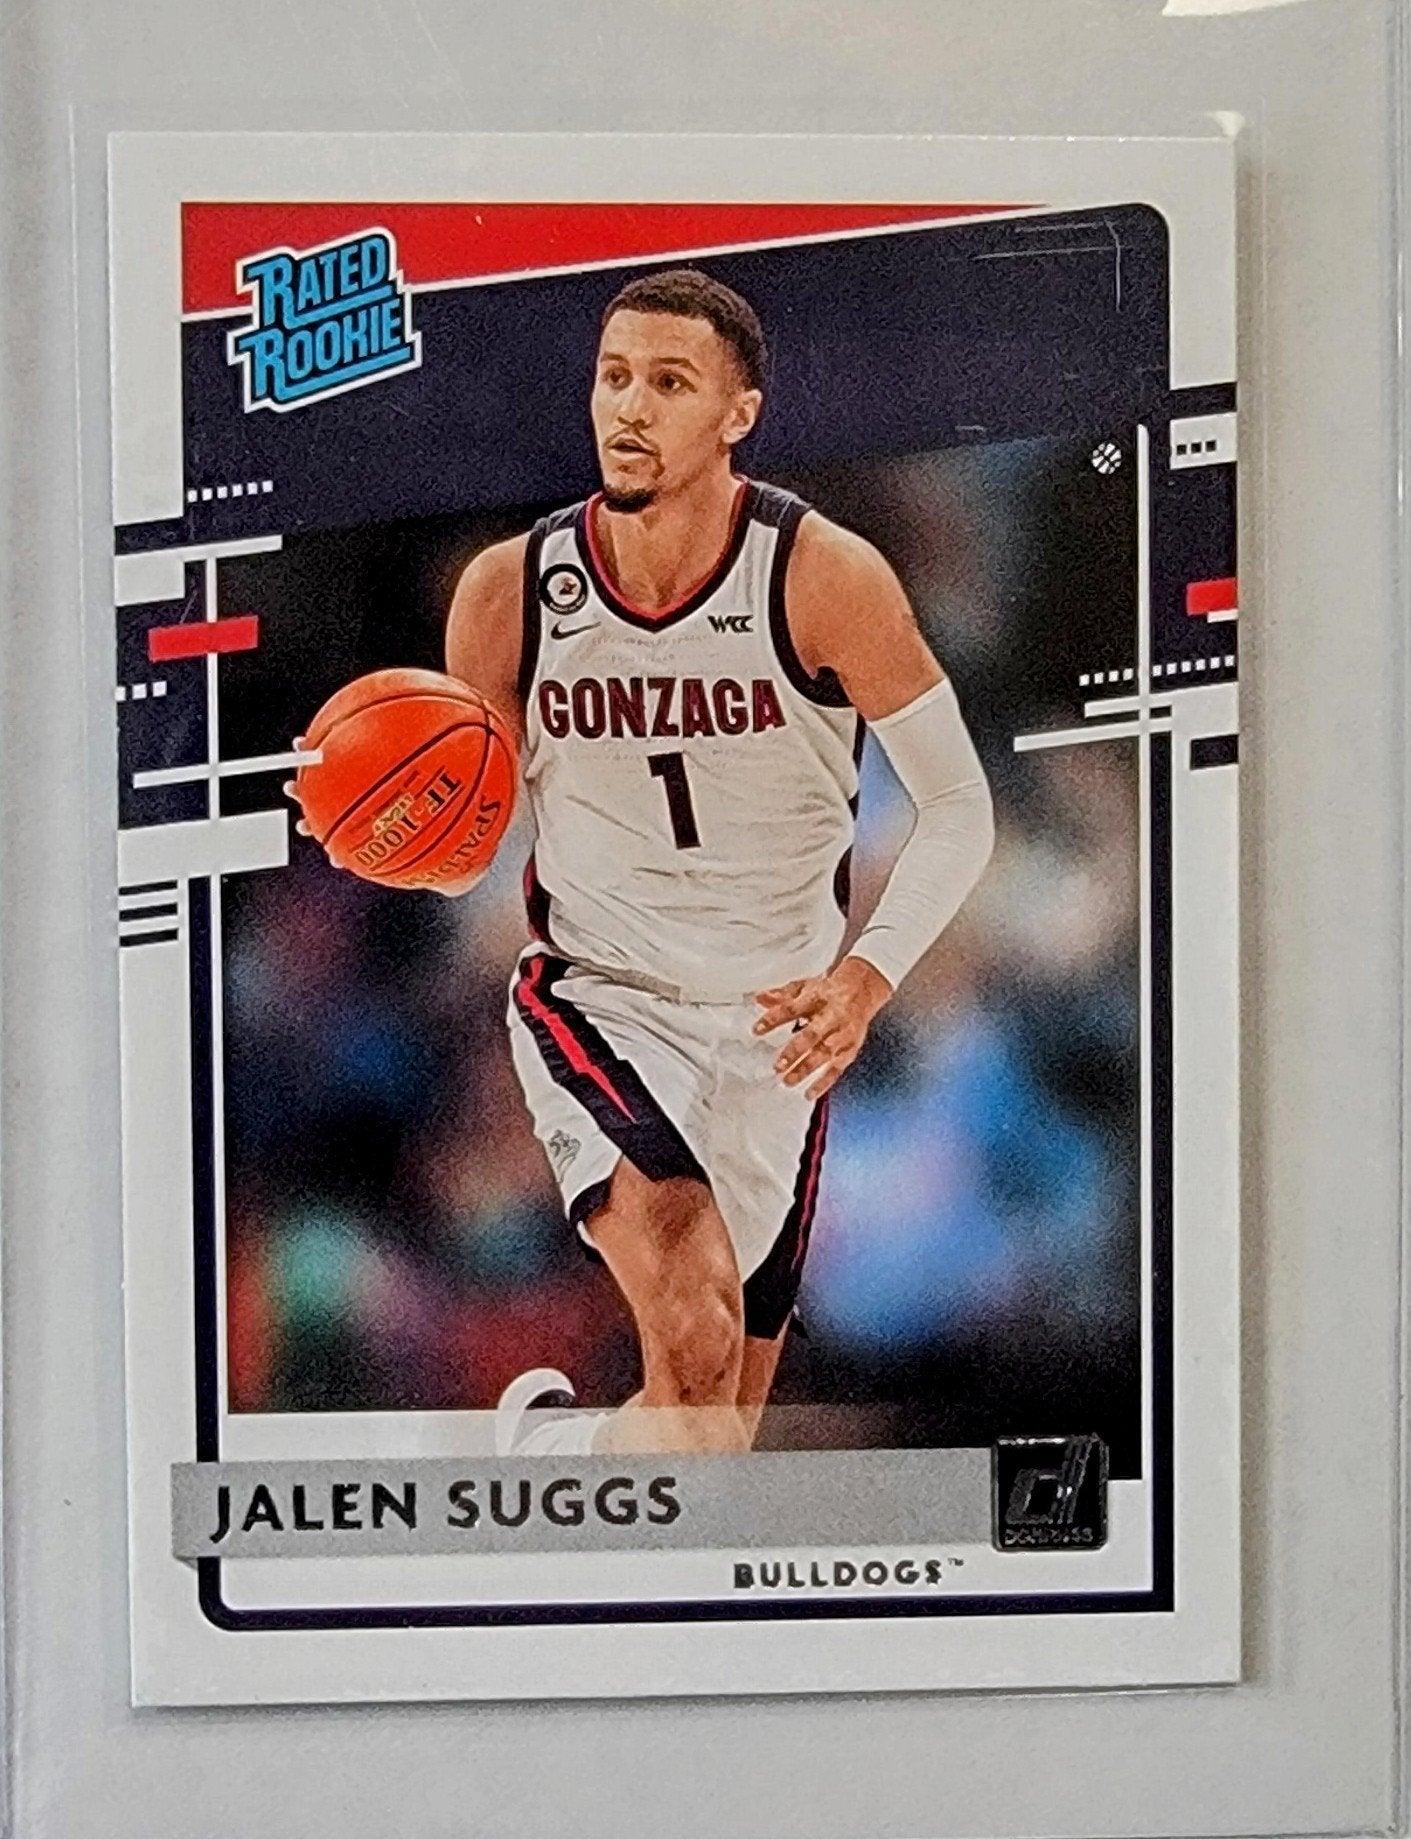 2021 Panini Chronicles Draft Picks Jalen Suggs Rated Rookie Basketball Card AVM1 simple Xclusive Collectibles   